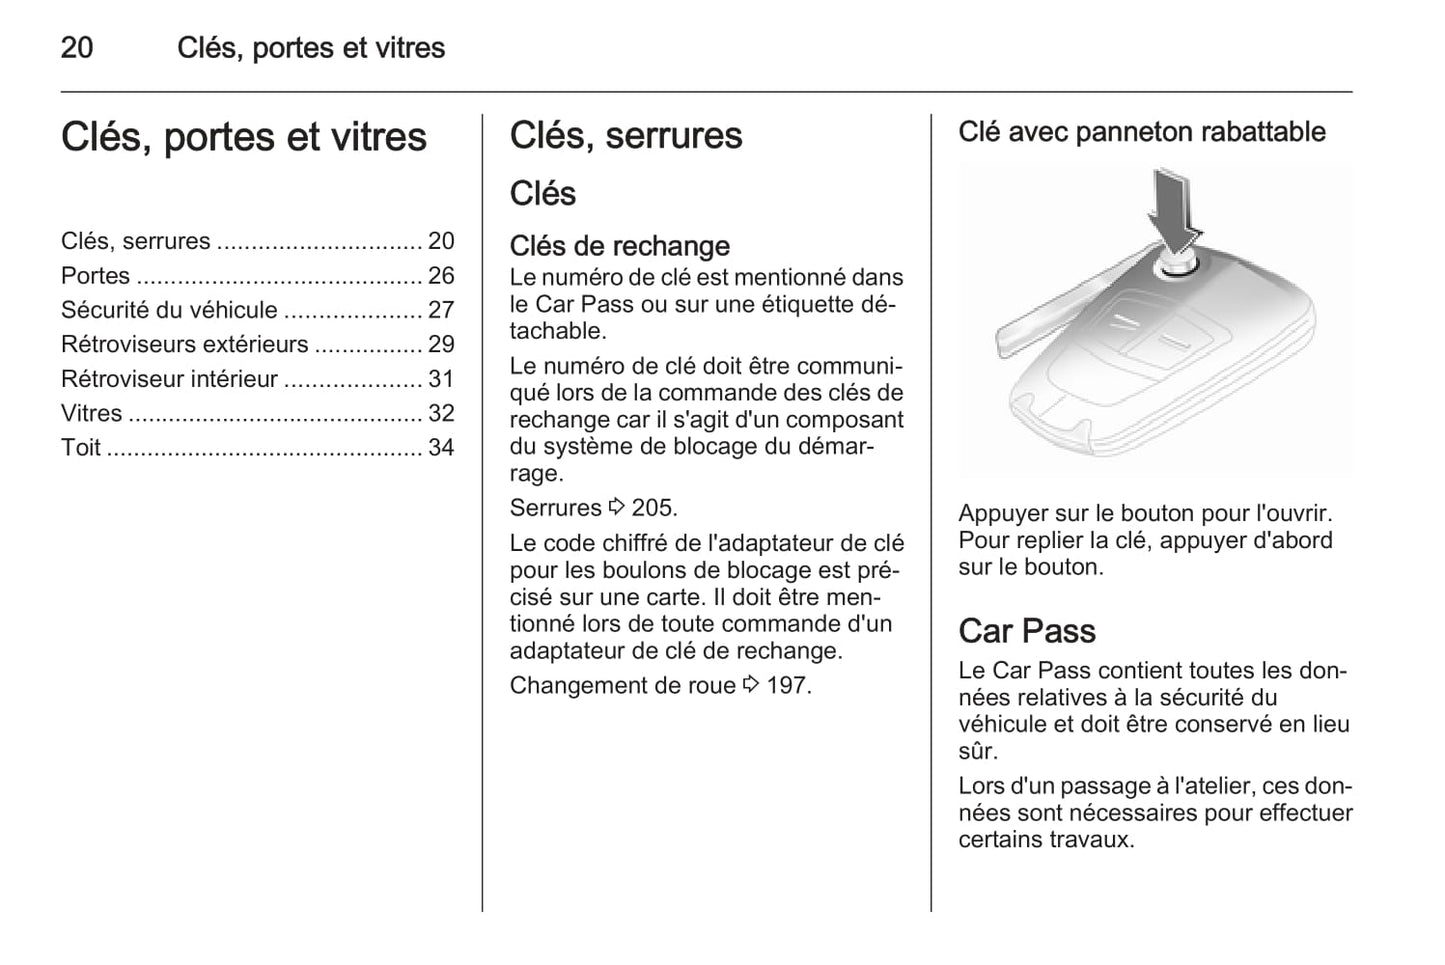 2013-2014 Opel Corsa Owner's Manual | French